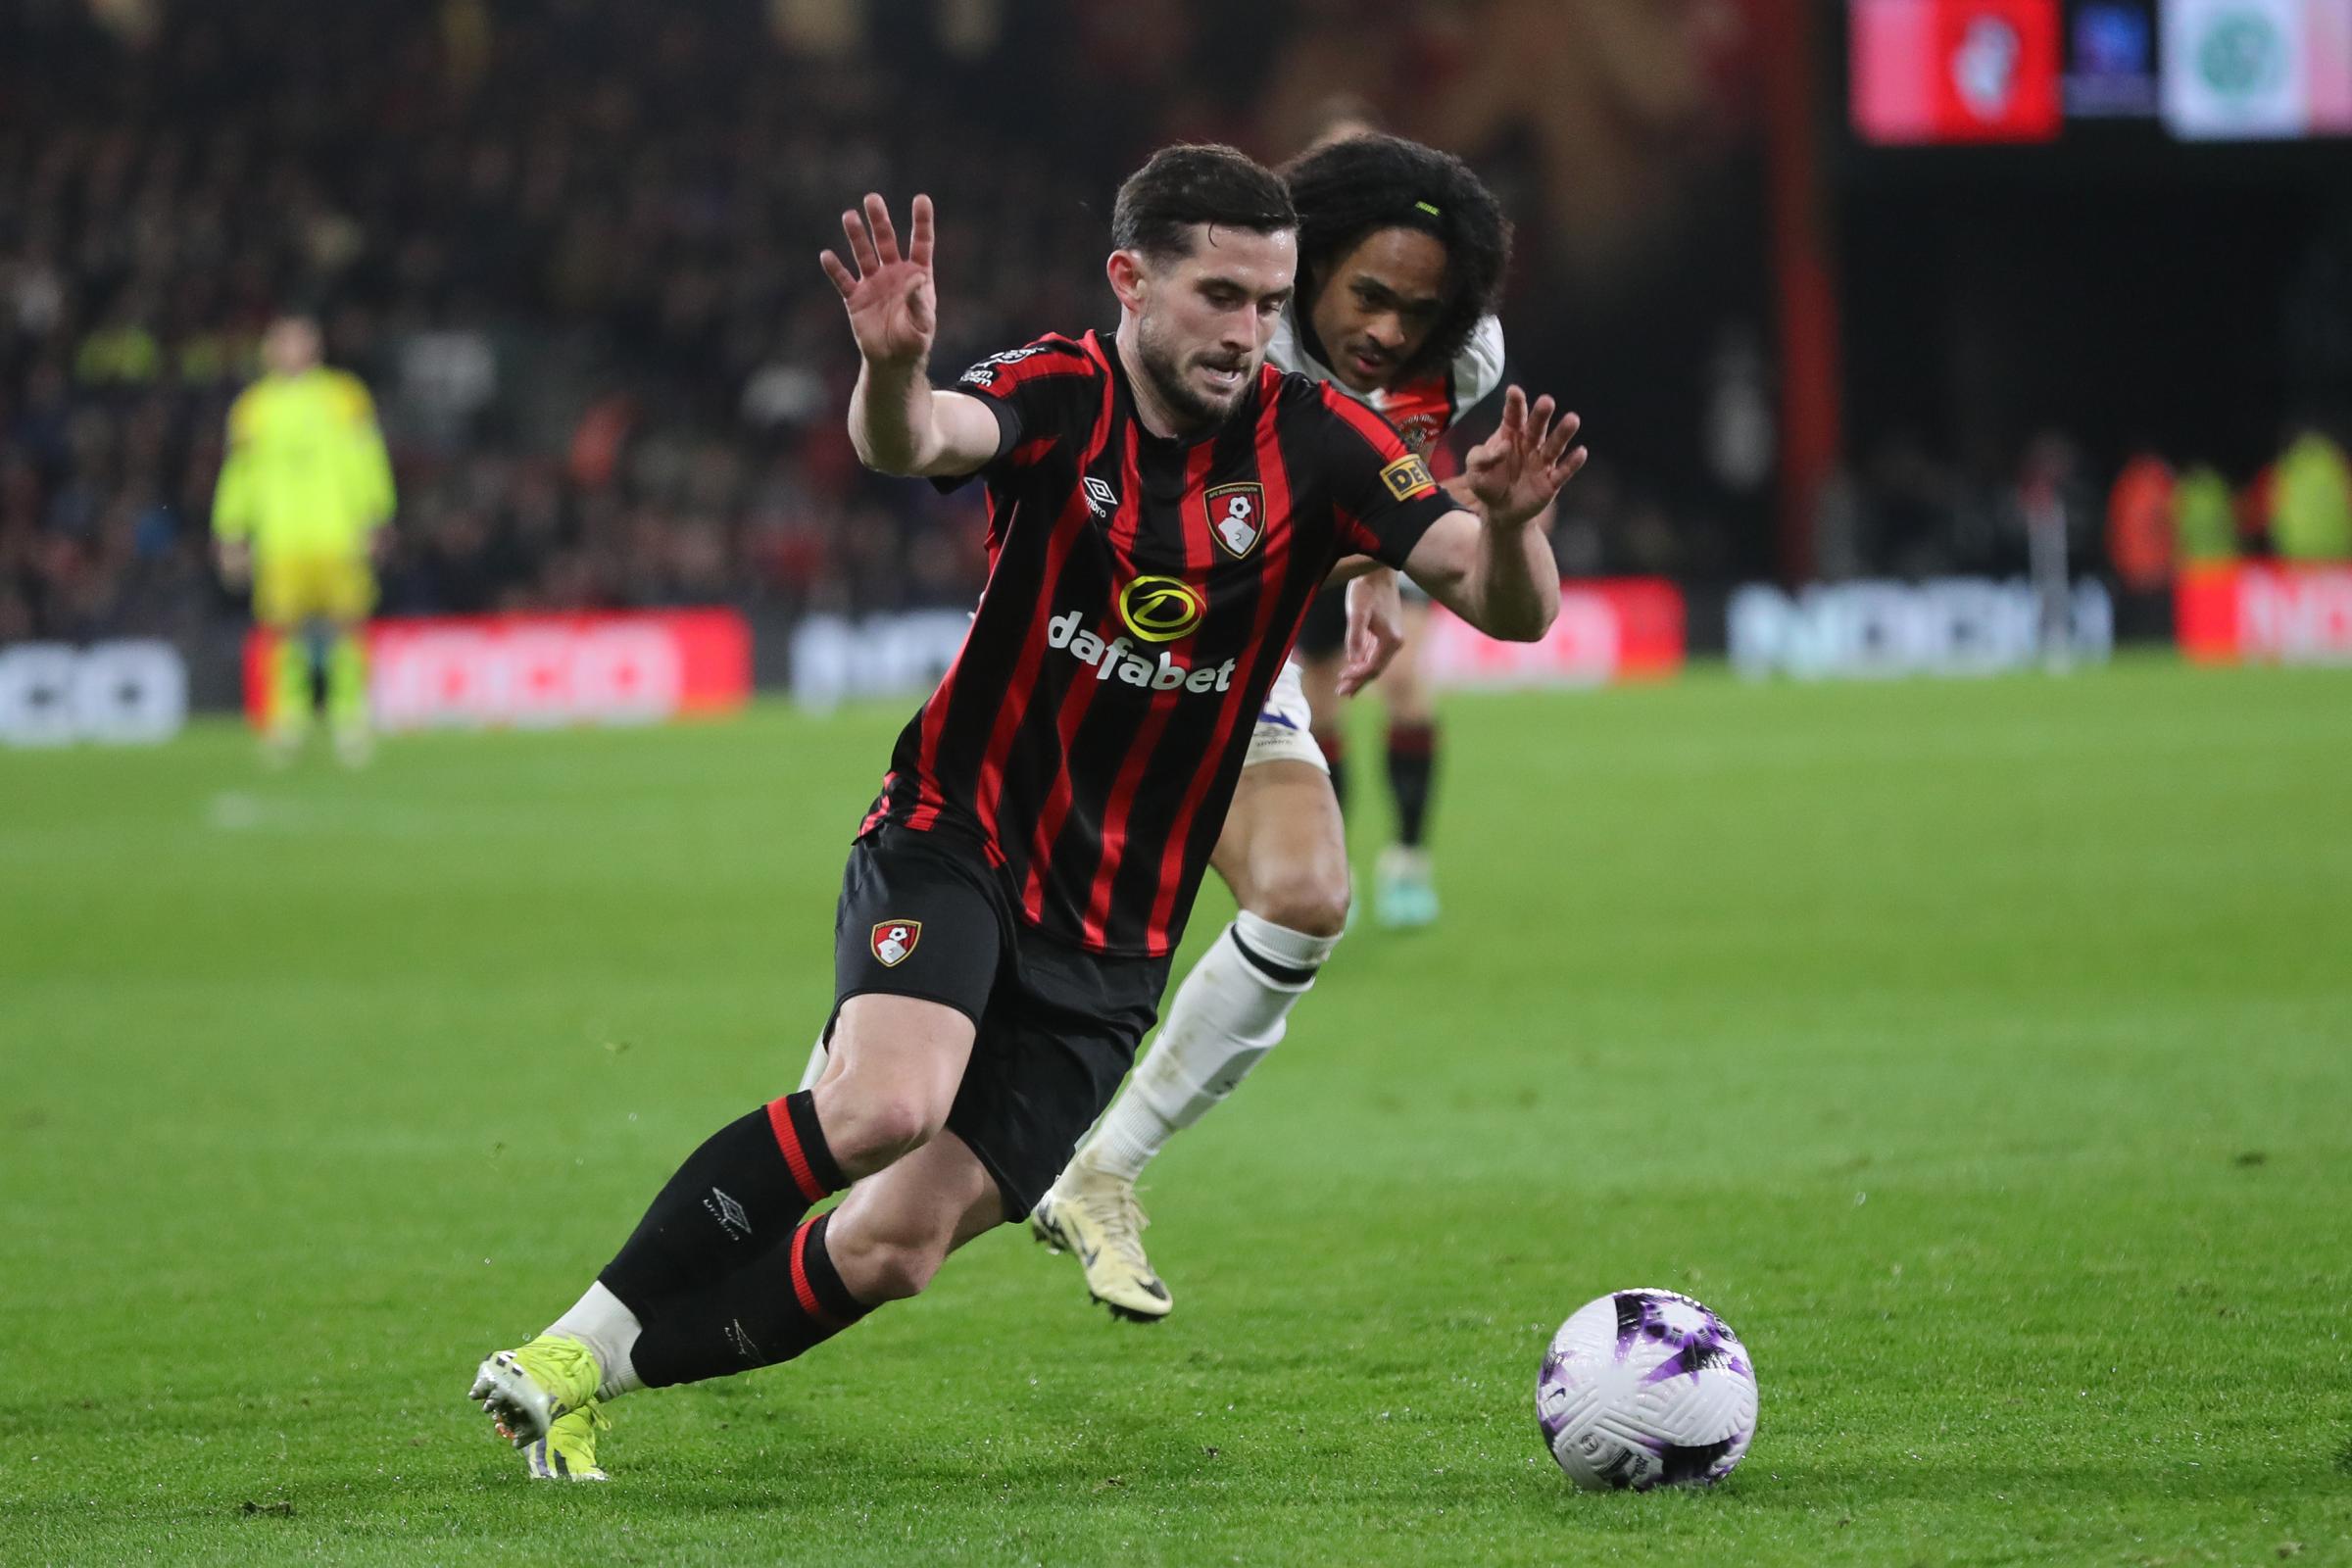 Lewis Cook eyes win at Chelsea to finish in top half of Premier League